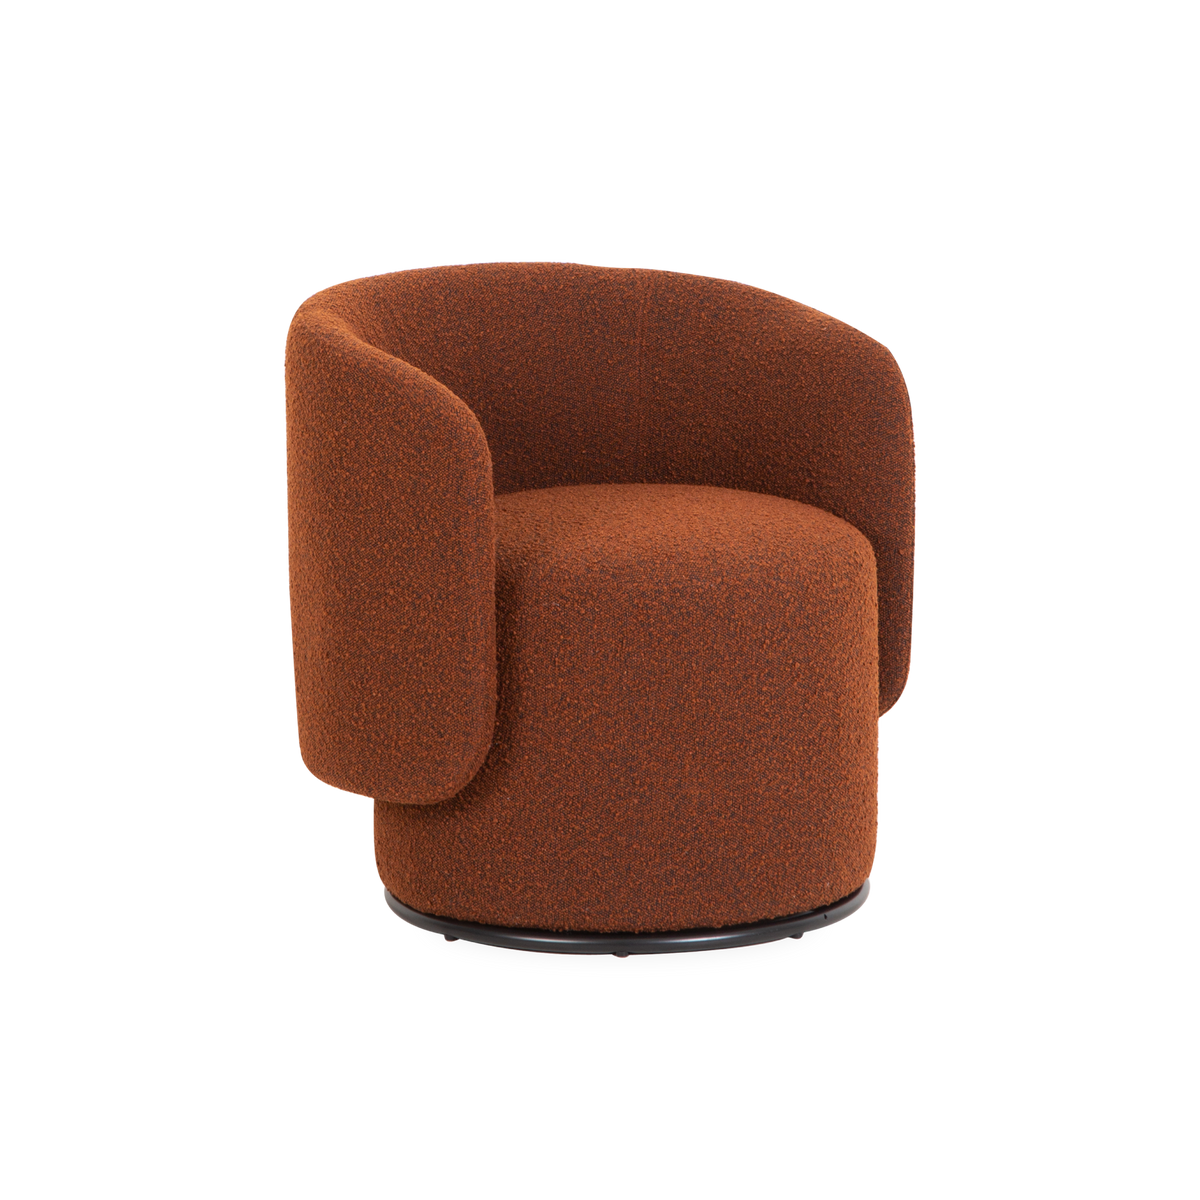 Composed of slim modern geometric proportions, the Alphie Swivel Chair packs a big punch.